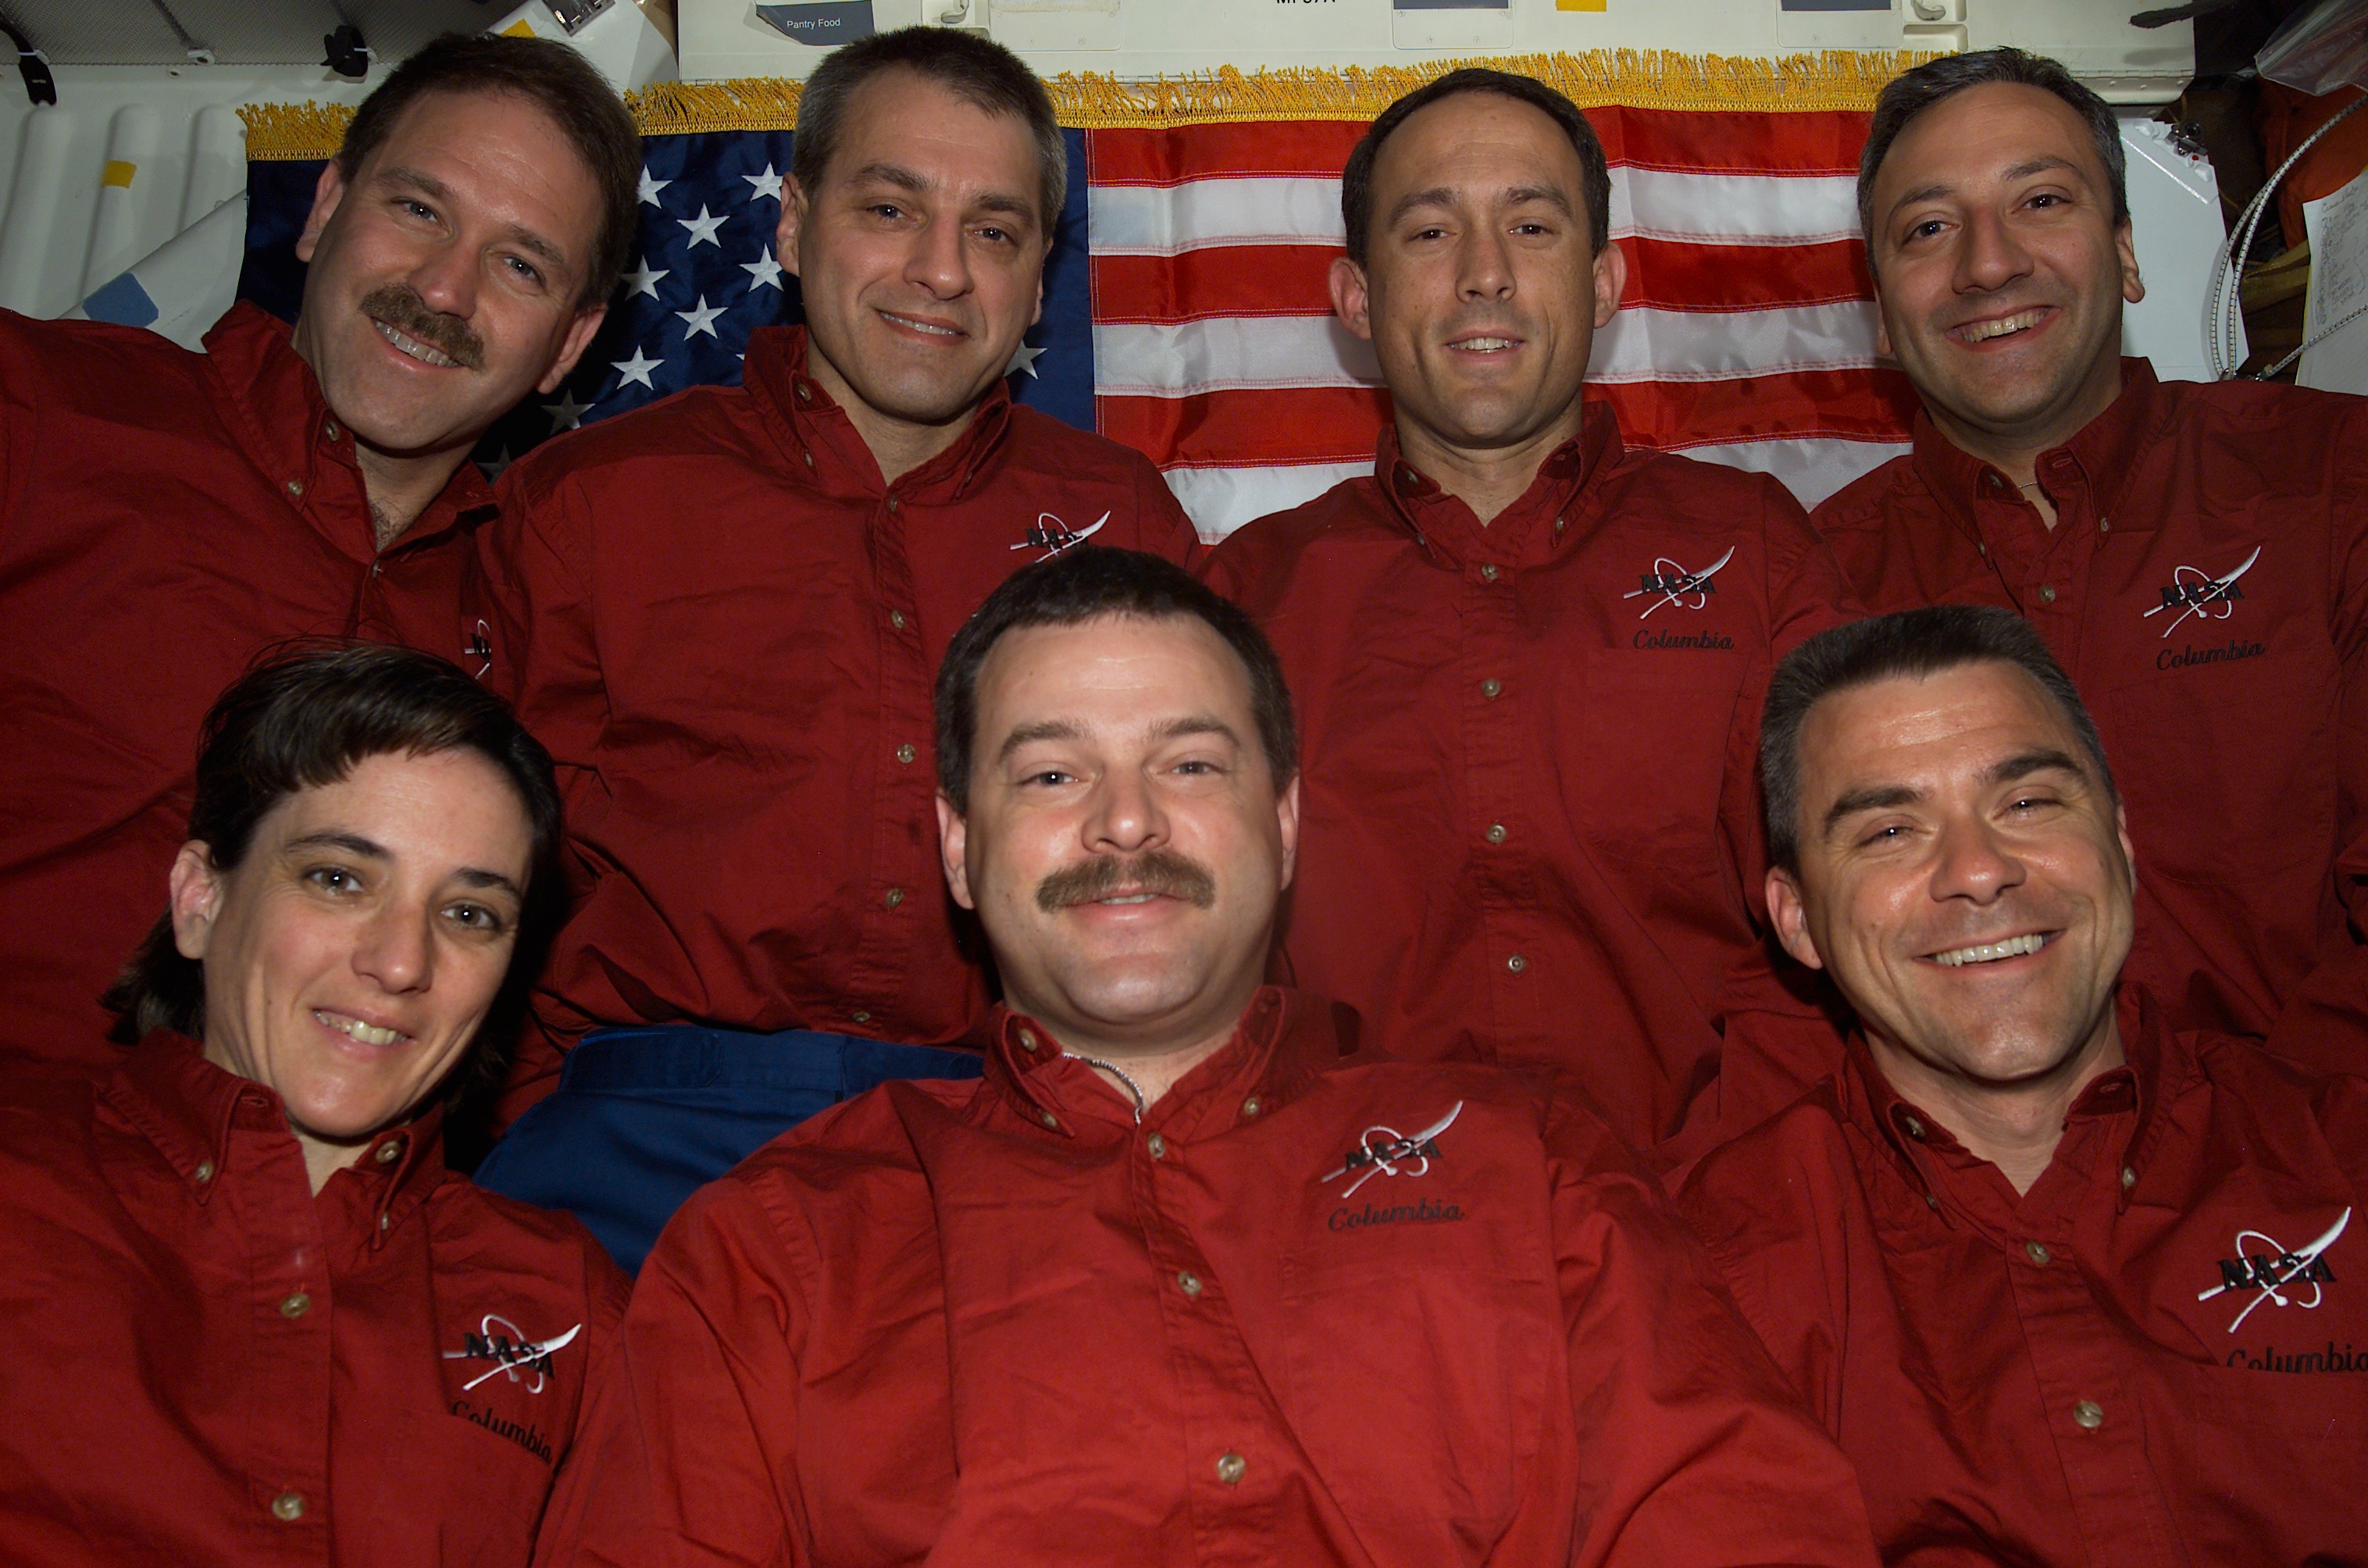 The STS-109 crew poses for a photo in front of an American flag in the crew cabin of the shuttle.